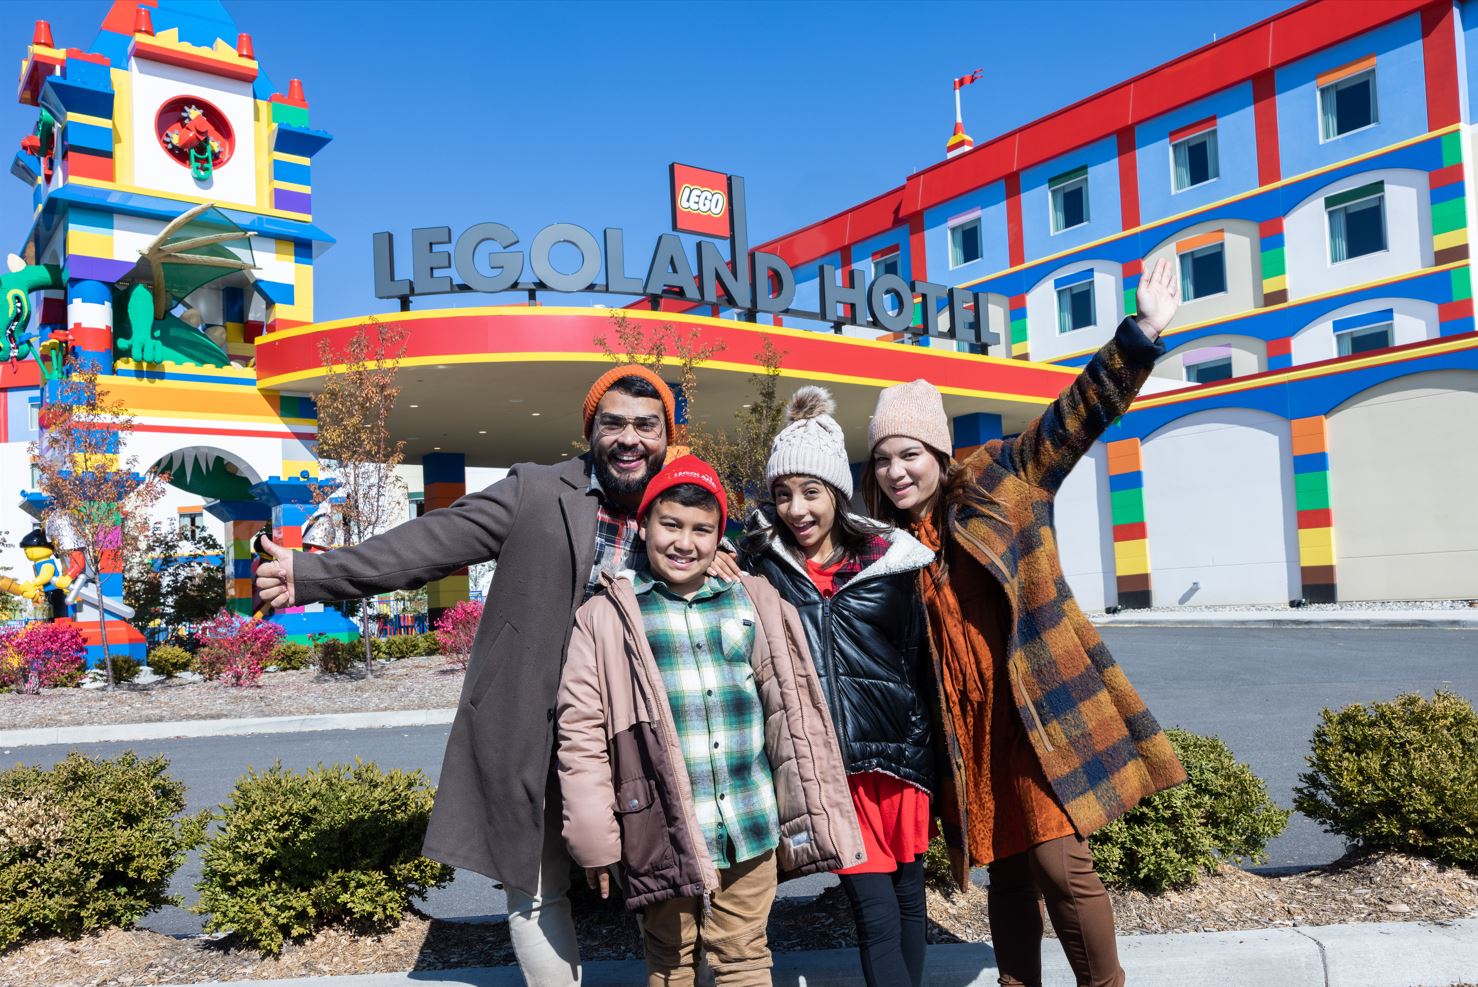 Stay at the LEGOLAND Hotel during our Holiday Bricktacular